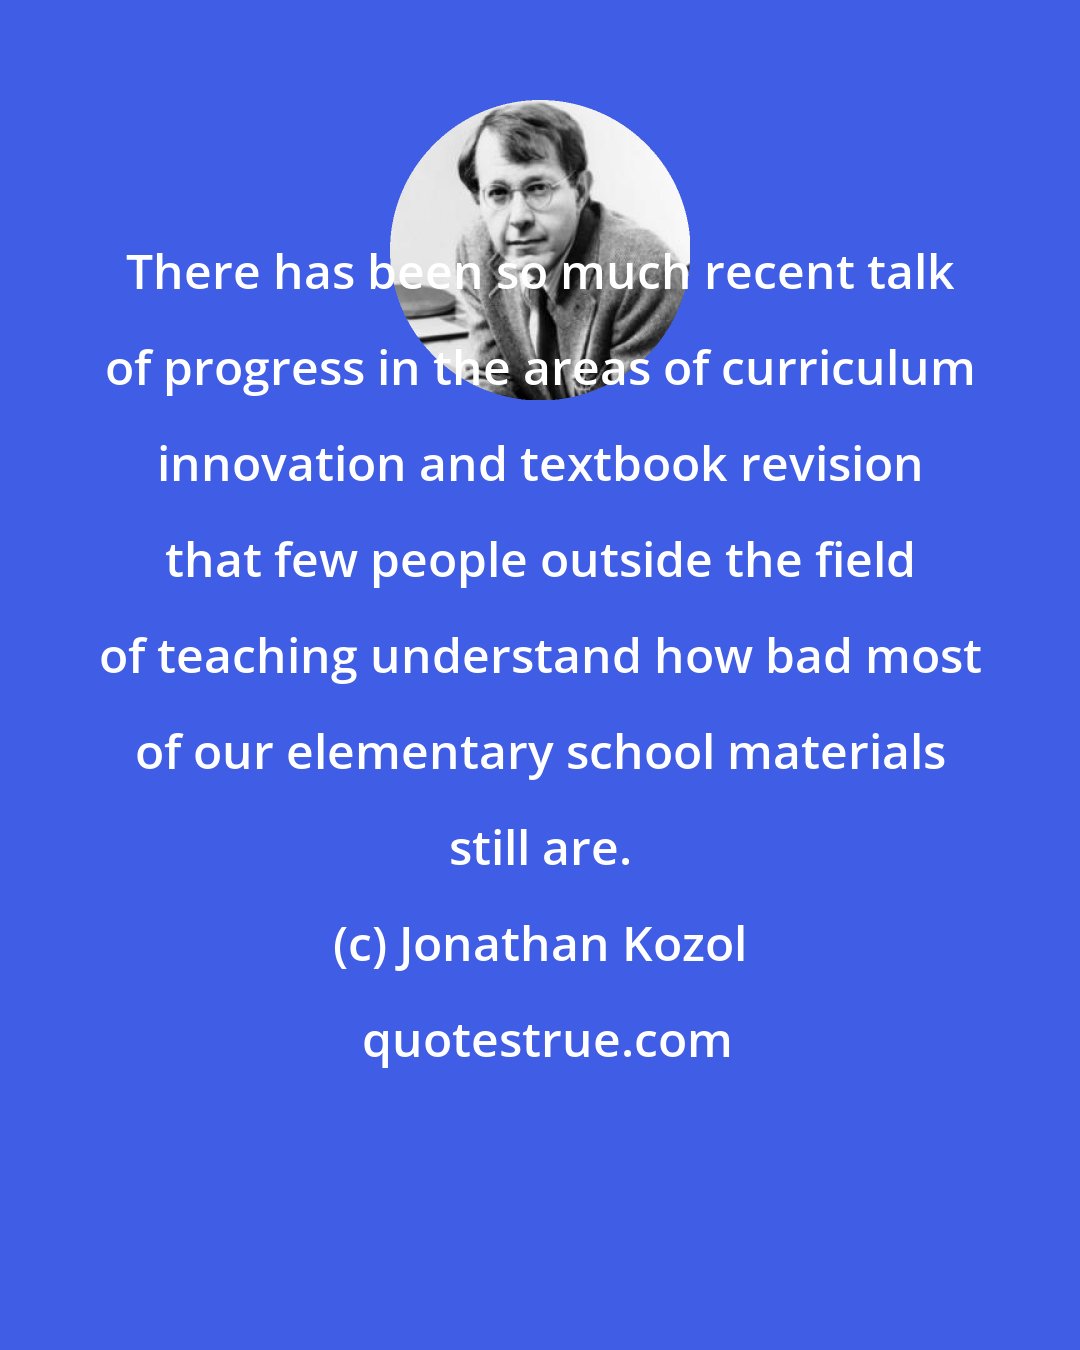 Jonathan Kozol: There has been so much recent talk of progress in the areas of curriculum innovation and textbook revision that few people outside the field of teaching understand how bad most of our elementary school materials still are.